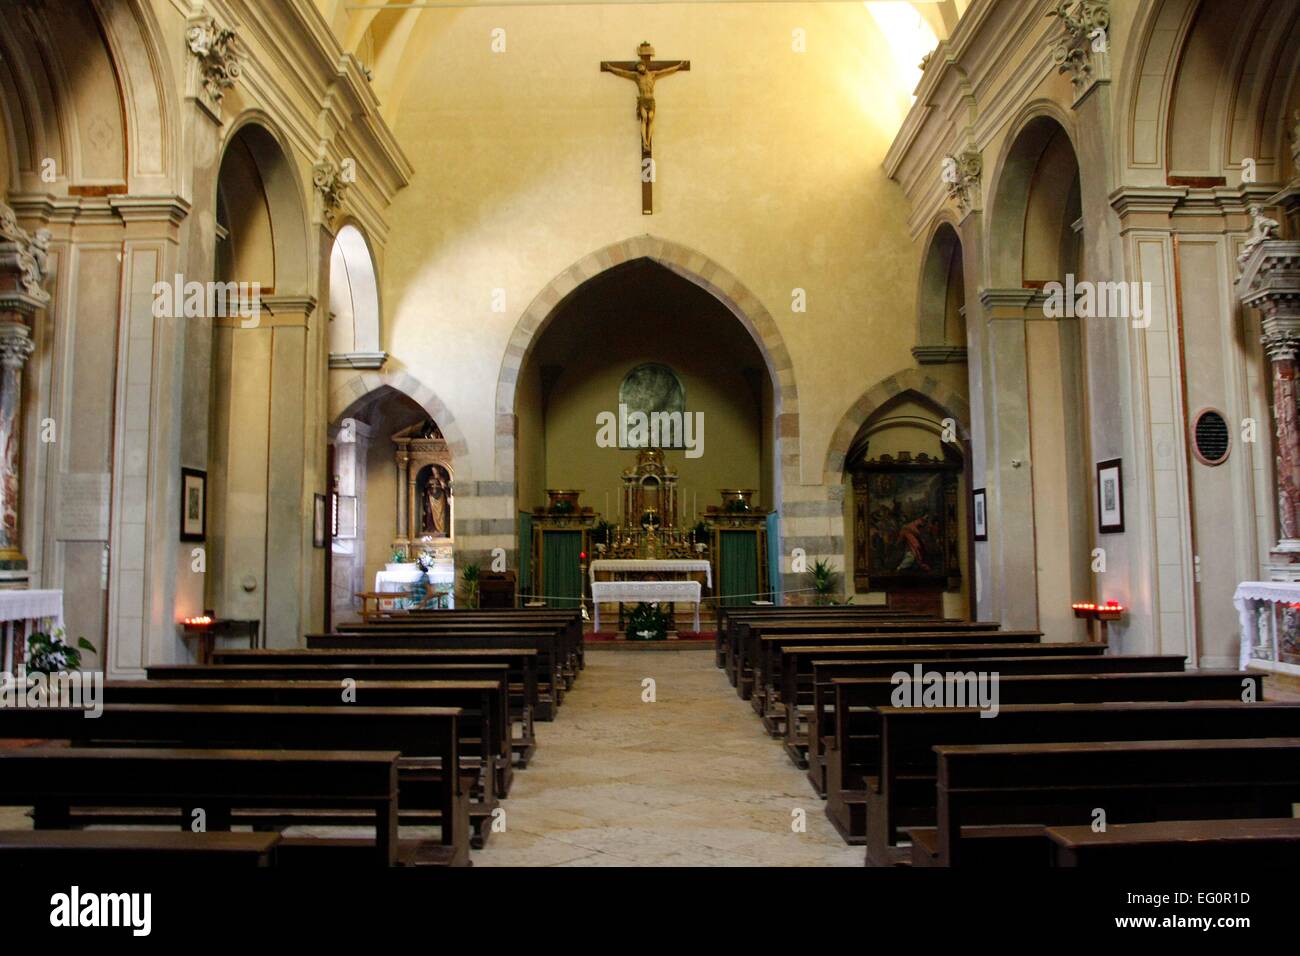 Nave and mainaltar of the church of San Francesco (St. Francis). It was built in 1289 by Franciscan monks in Gargnano, Italy. It is a simple Romanesque church. In 1912 the church was classified as a National Monument by the Italian government. Photo: Klaus Stock Photo